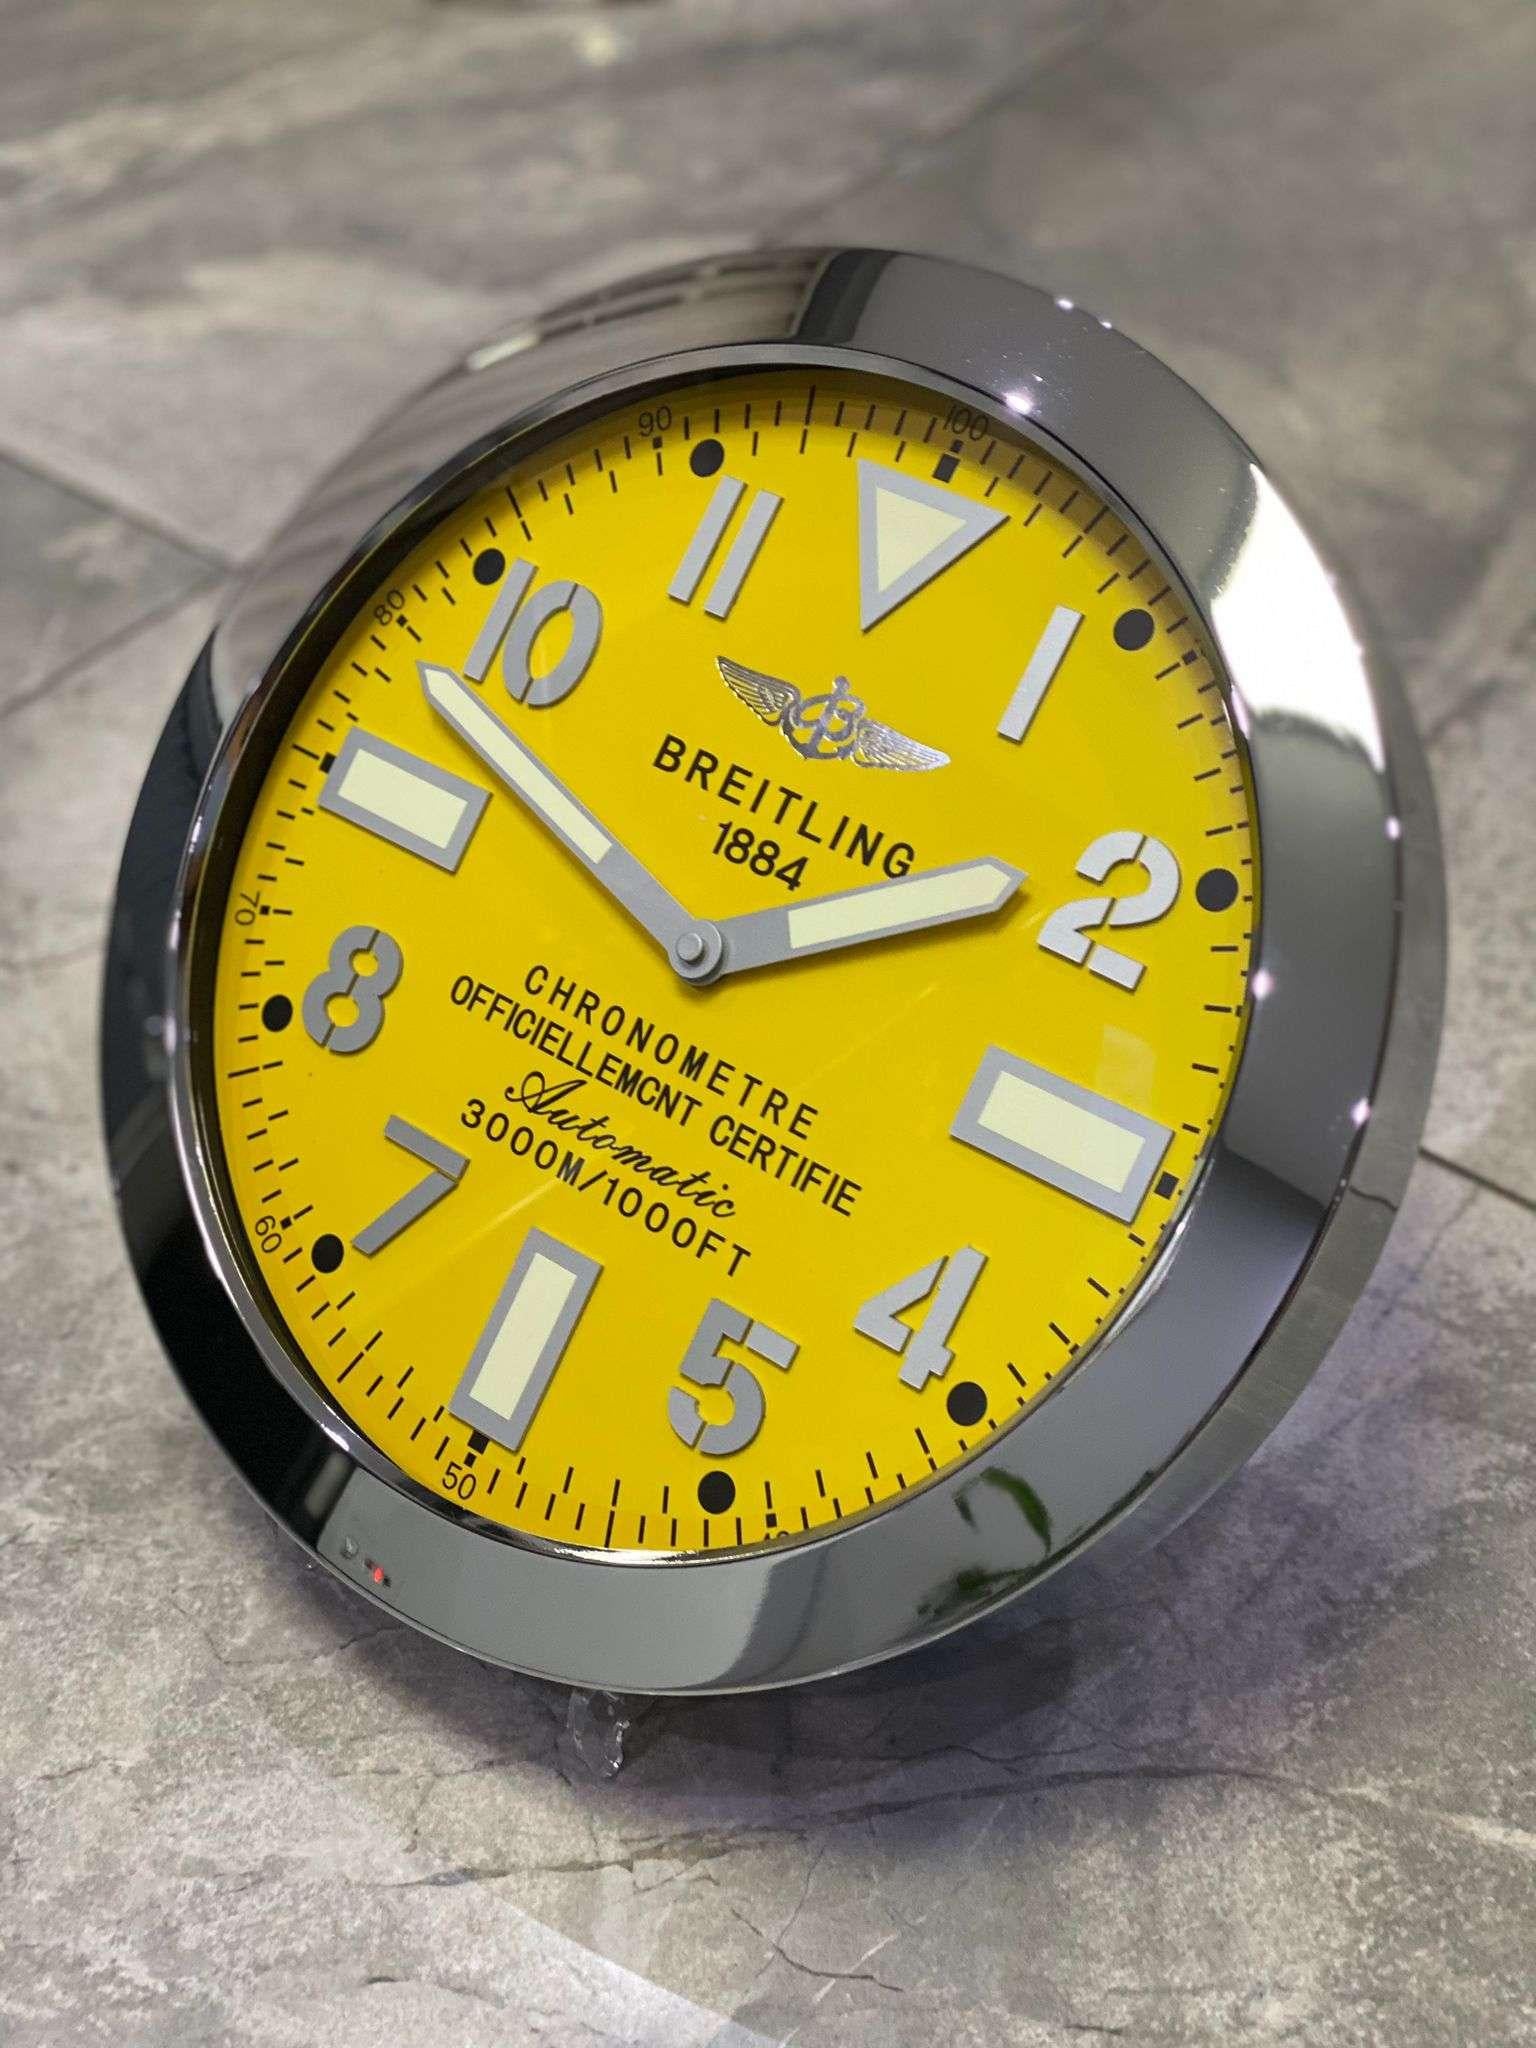 Breitling Chronometer Luxury Fluted Bezel Luminous Wall Clock
Luxurious stainless steel case, wall clock based on the BREITLING in silver steel with the iconic fluted bezel.
Choice of Markers with or without lume strips Sweeping Quartz movement